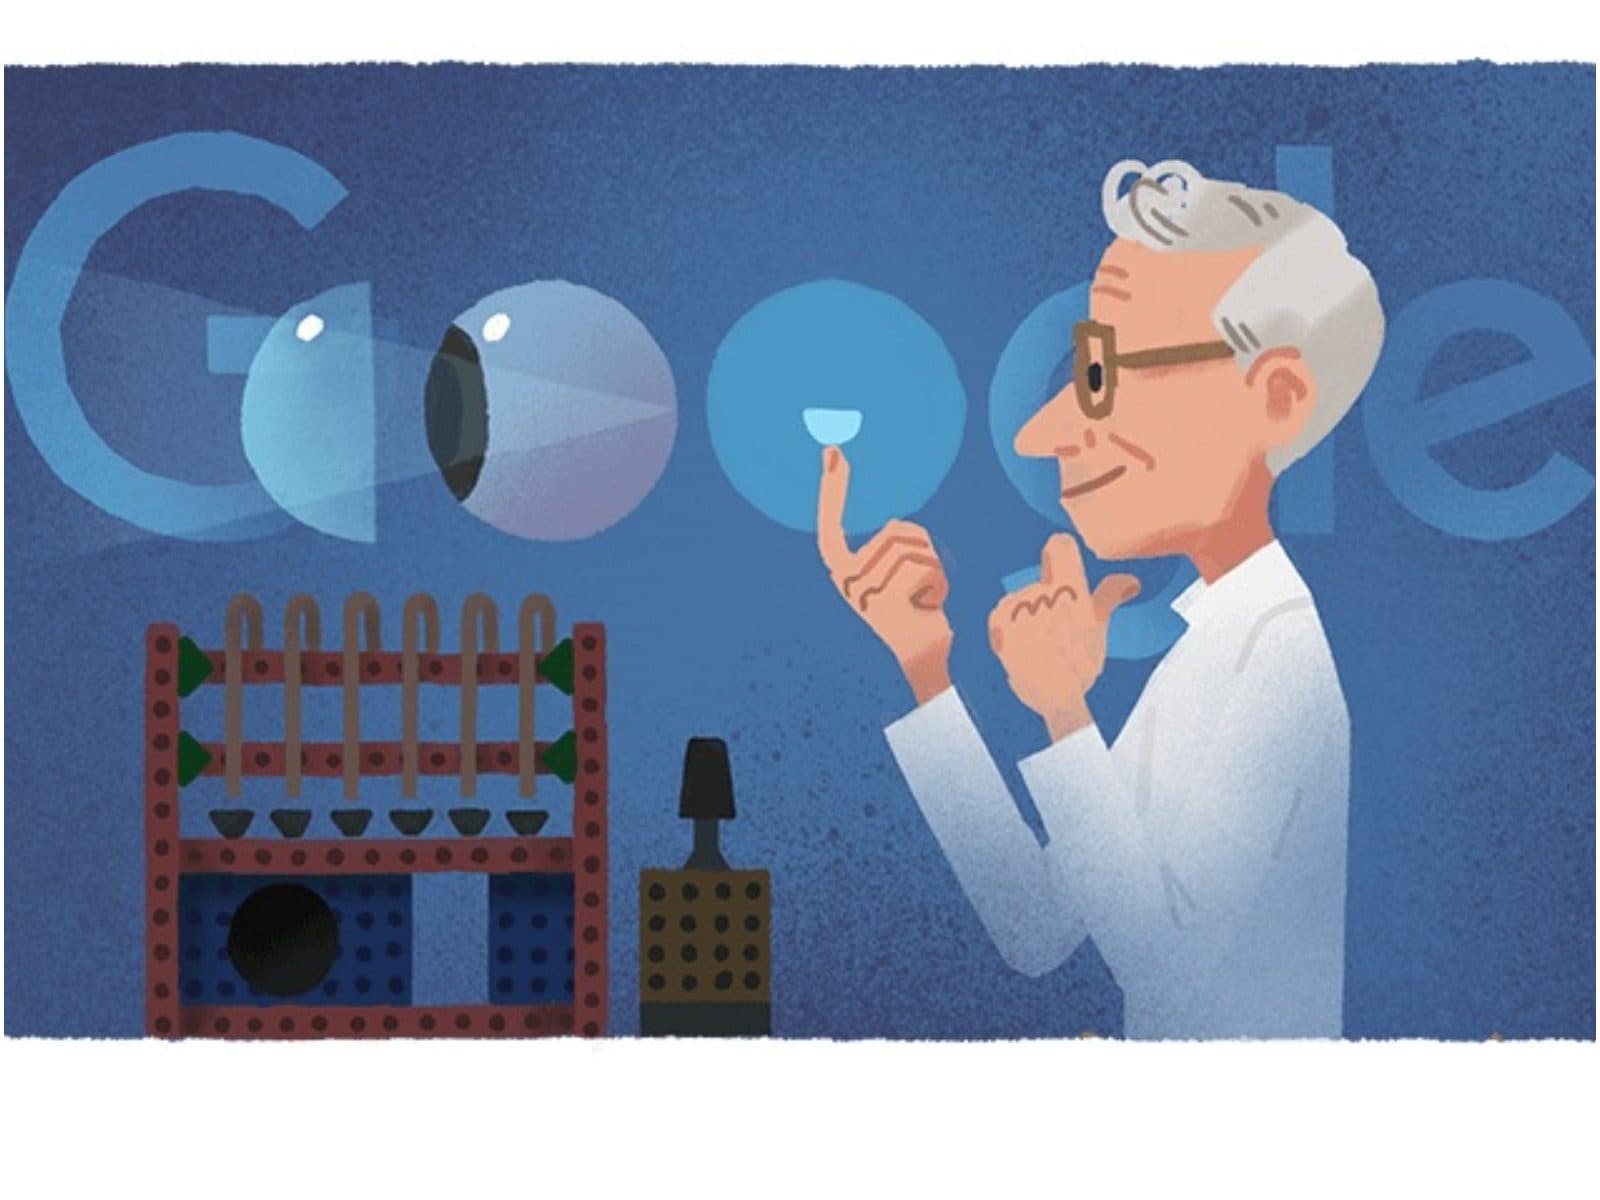 Google Doodle Celebrates 108th Birth Anniversary of Otto Wichterle, Inventor of Contact Lens - News18